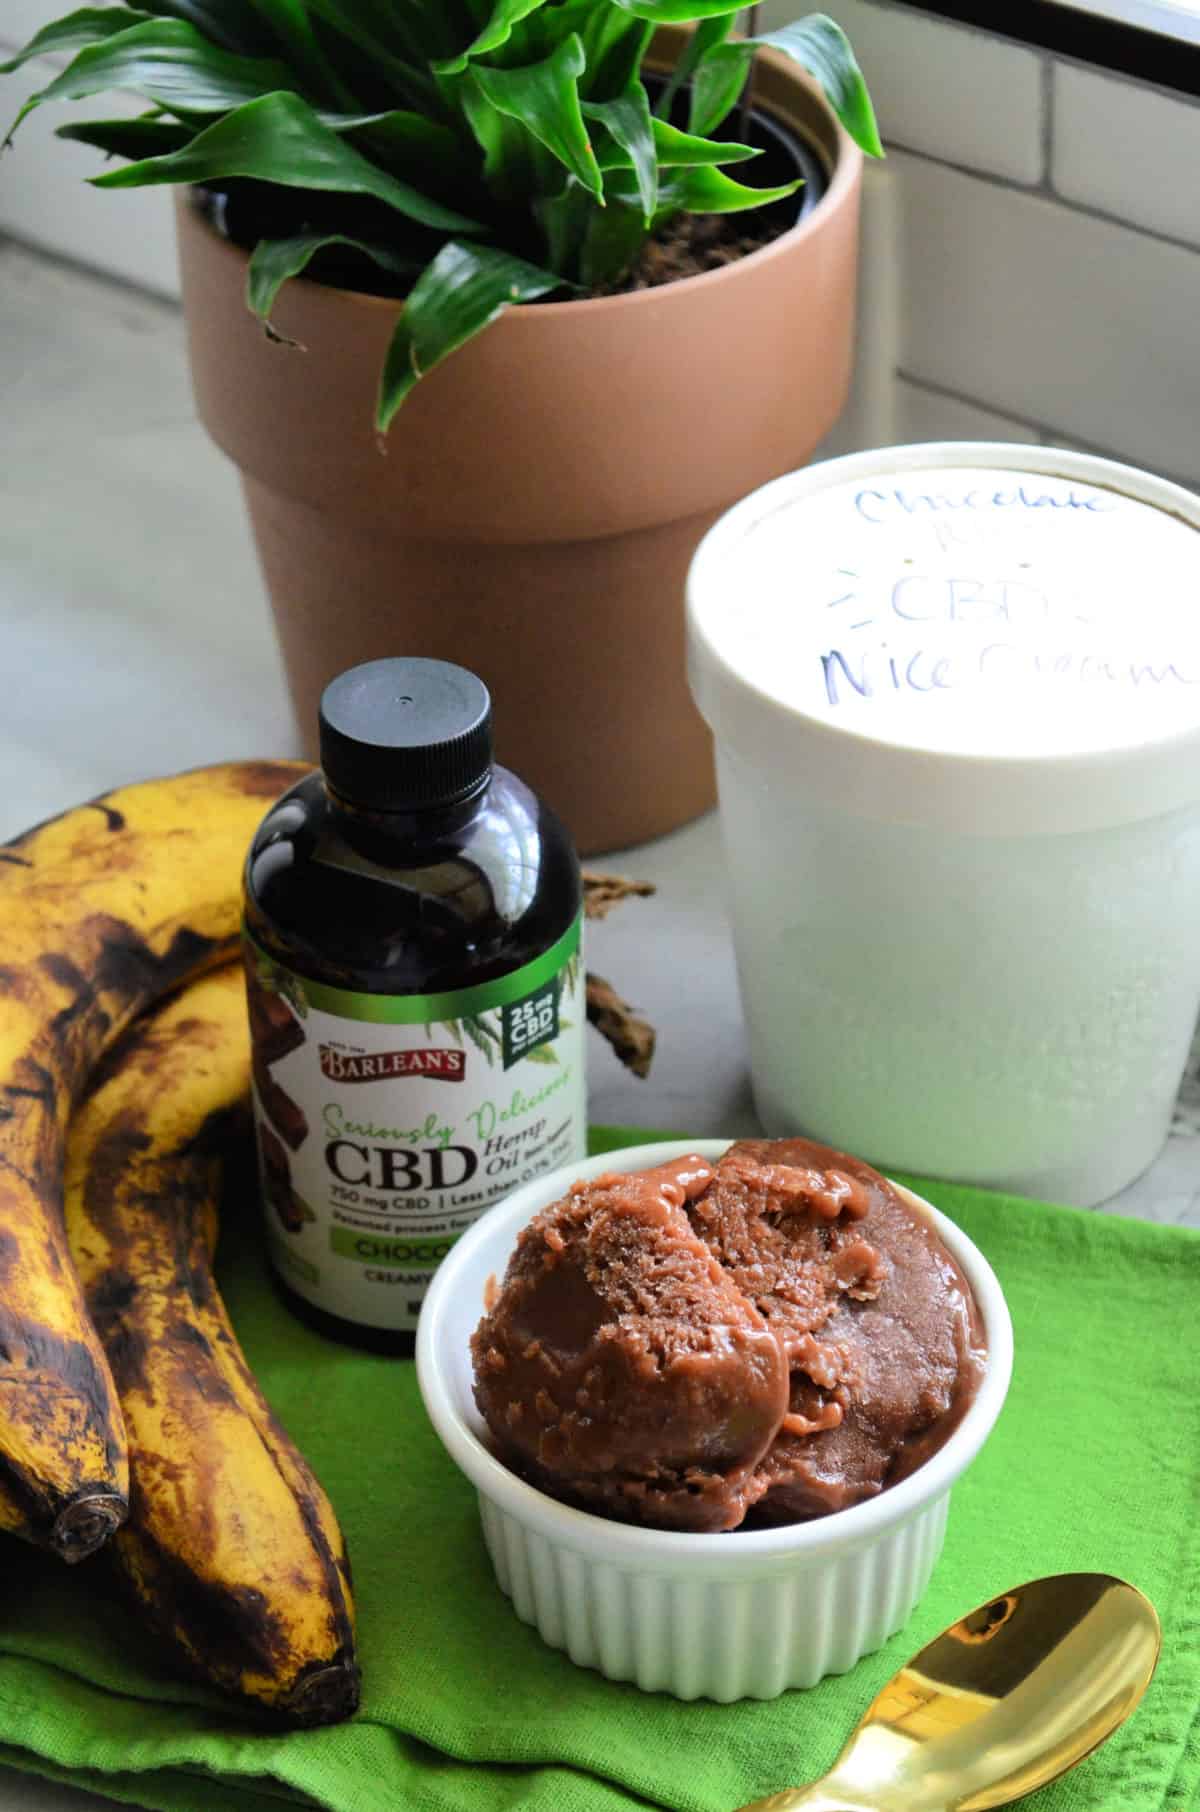 top view bowl of chocolate ice cream next to bananas, CBD oil bottle, labeled pint, and house plant.